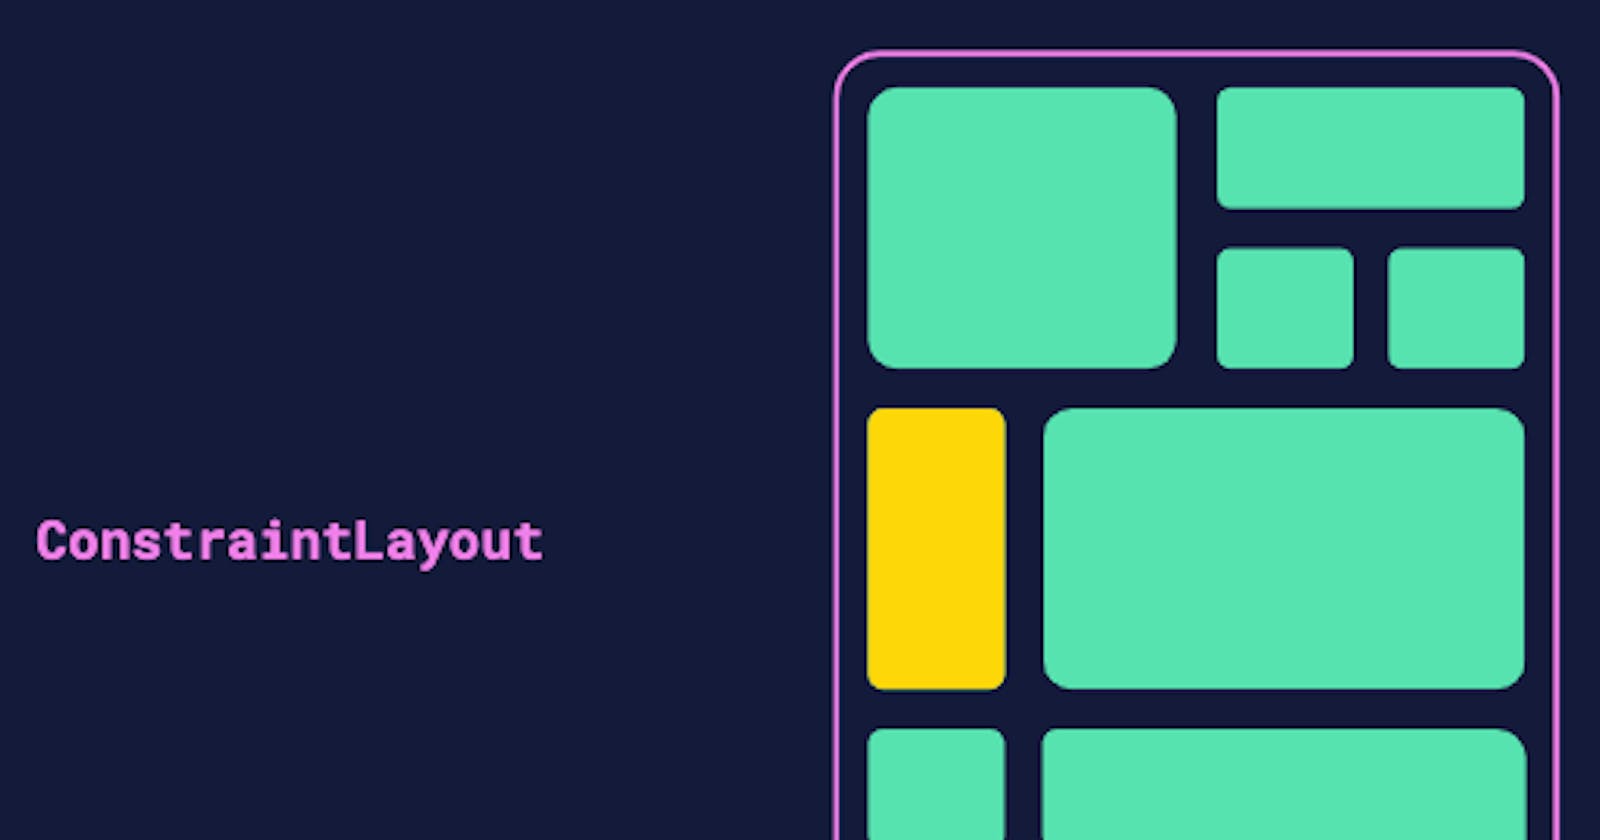 The awesomeness of Constraint Layout